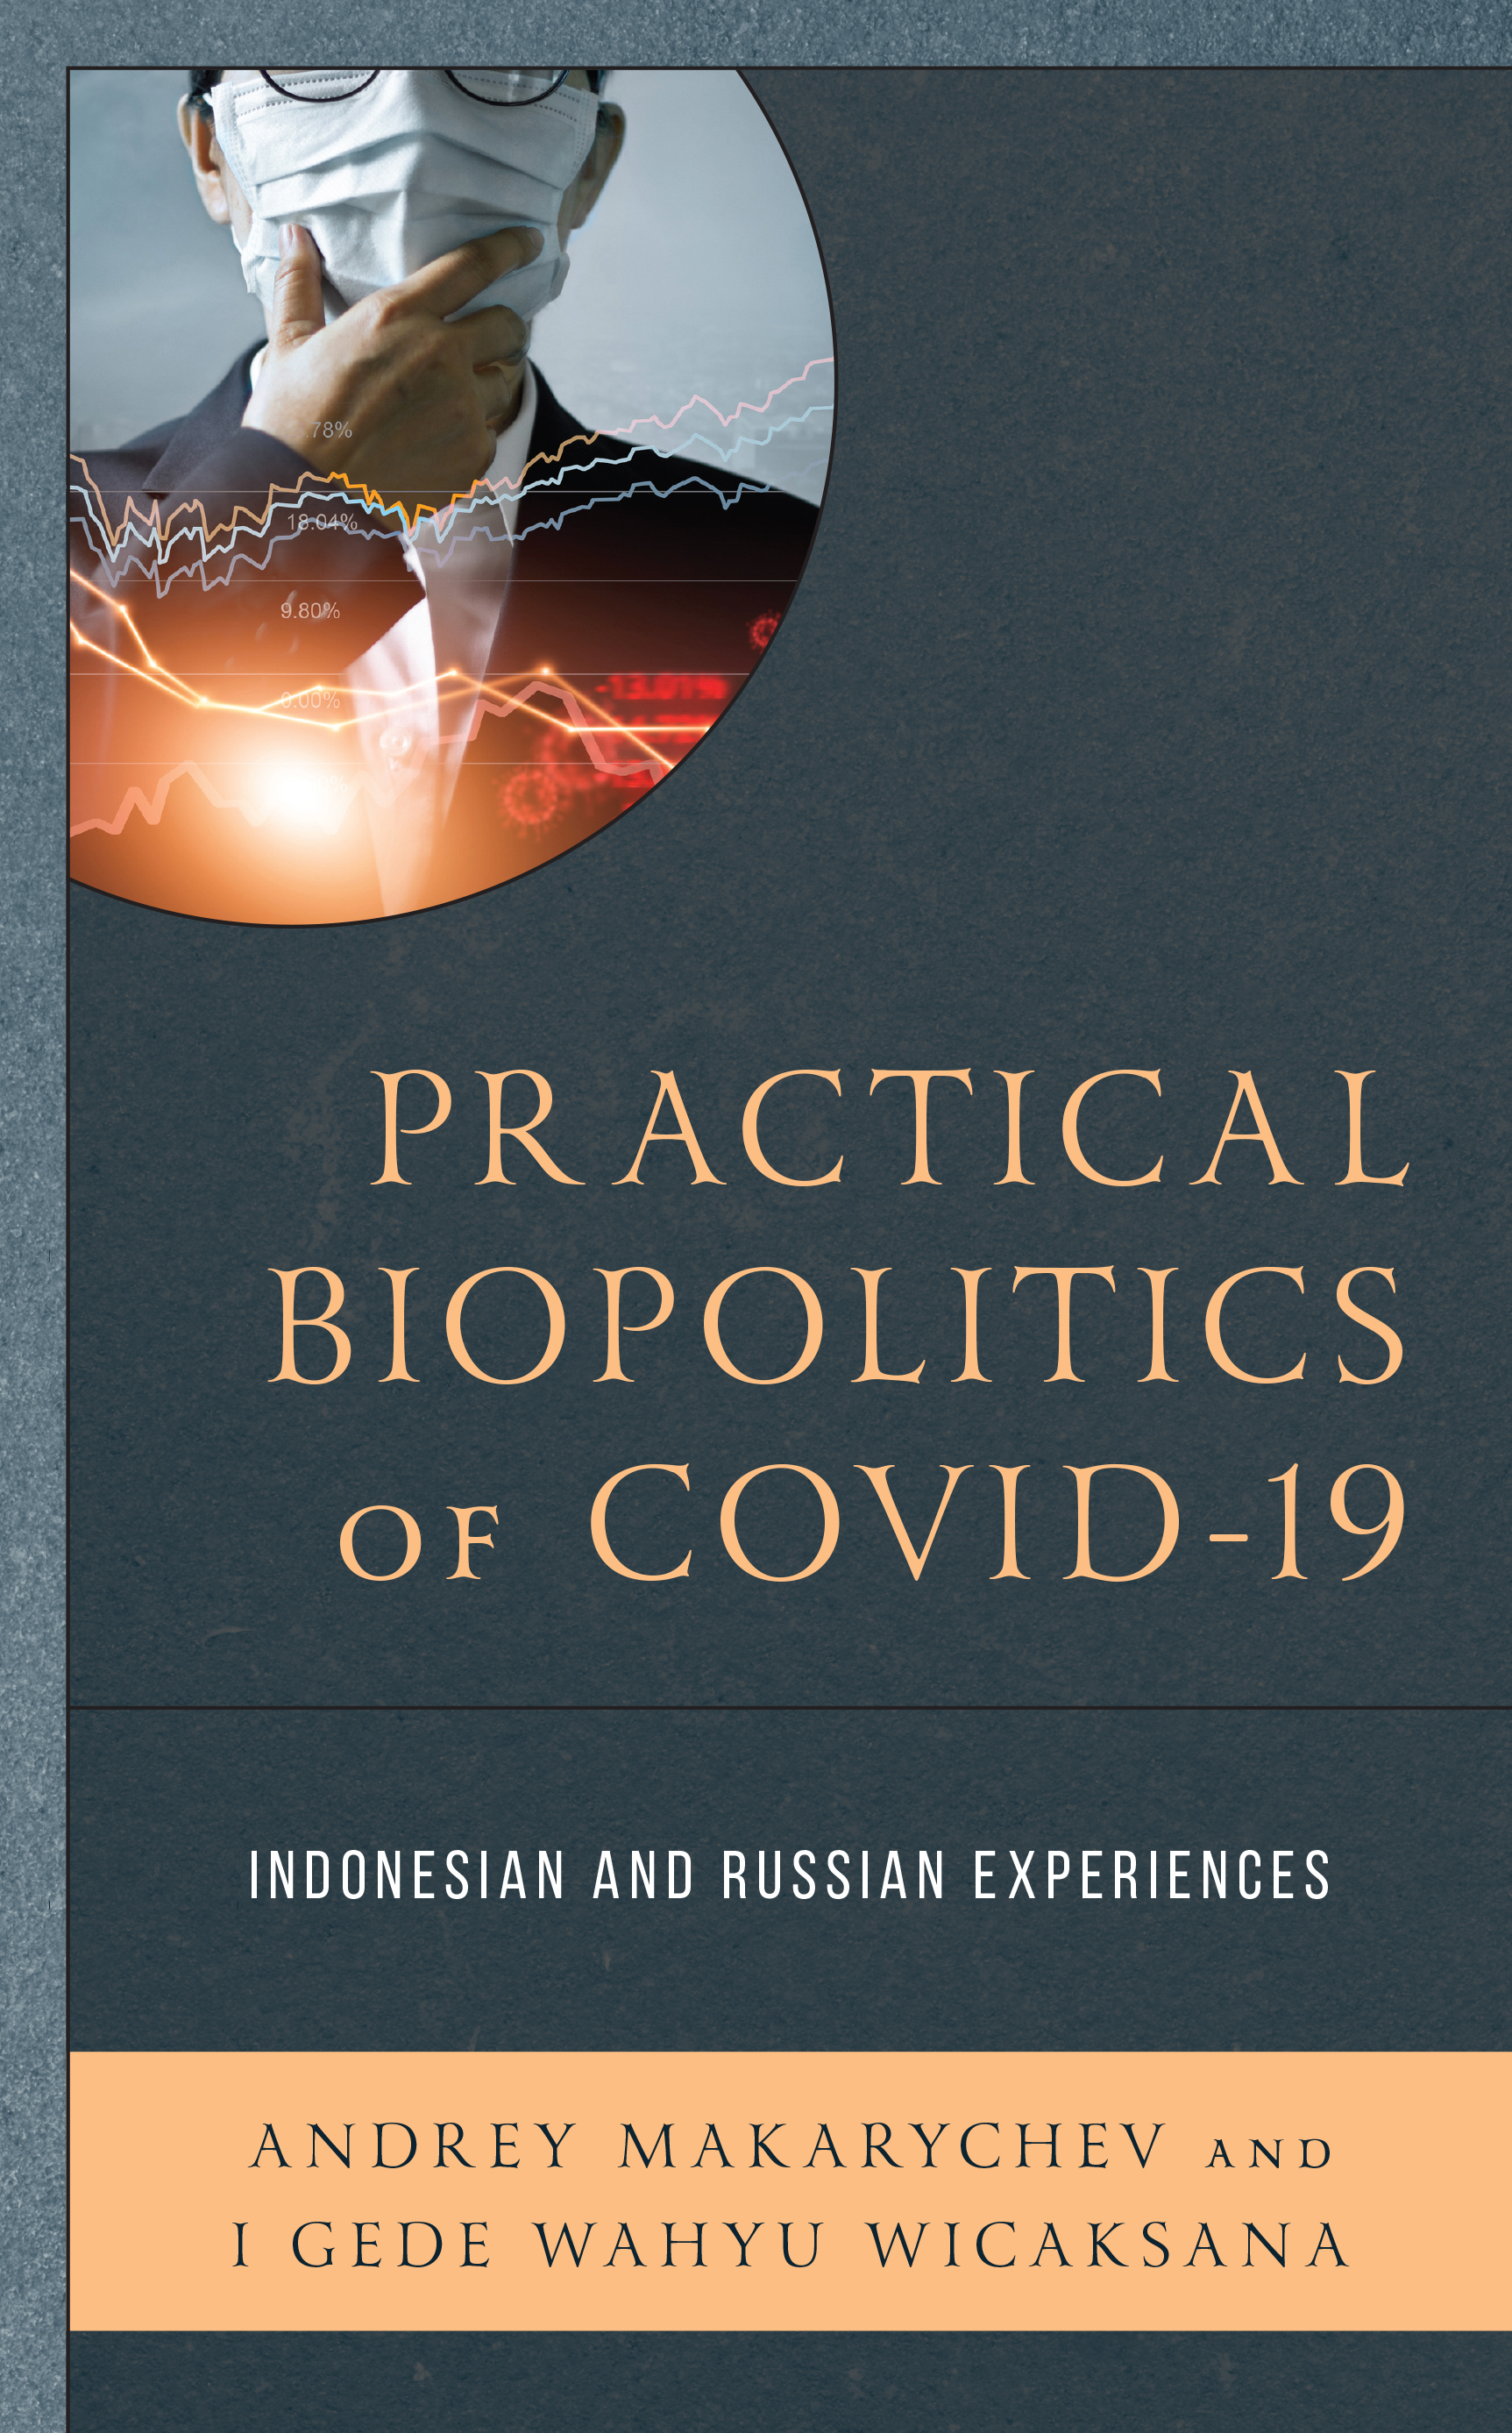 Practical Biopolitics of COVID-19: Indonesian and Russian Experiences